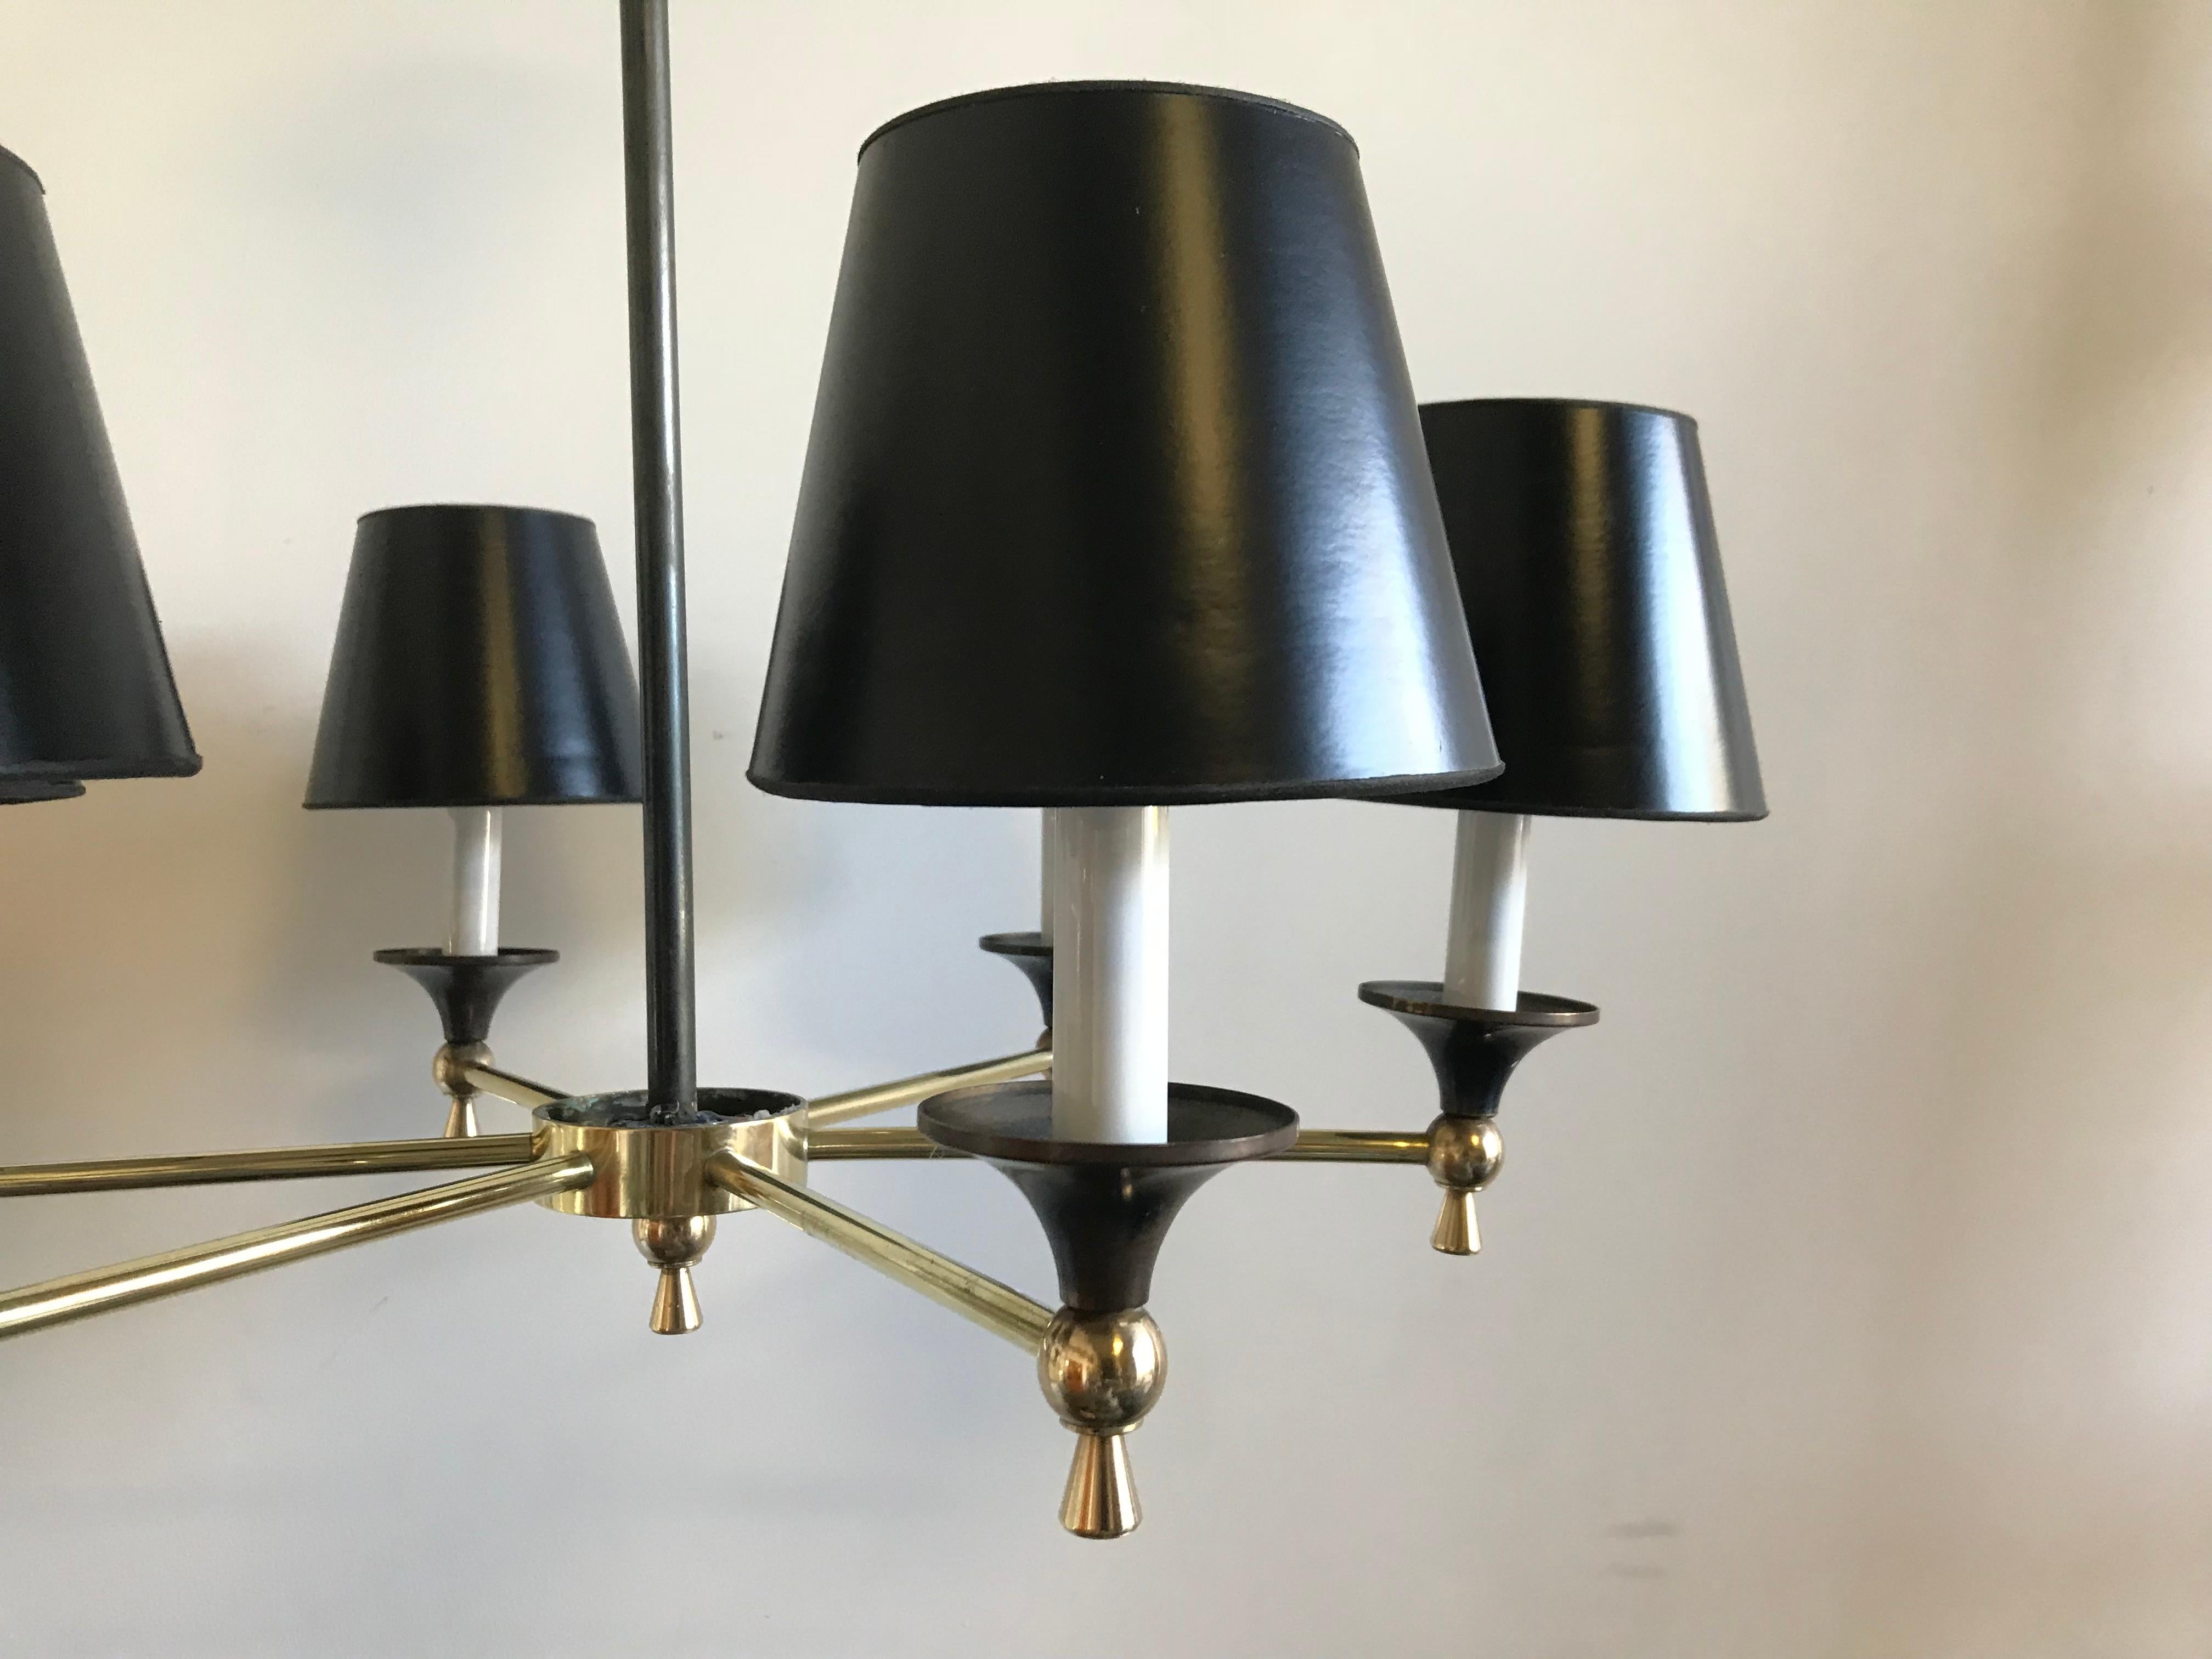 Beautiful brass and steel 6-light chandeliers, circa 1950s by Jacques Adnet, Paris - excellent condition.

Adnet is a distinctive figure of French 20th century design born in France in 1901. He believed in the functional aspect of furniture